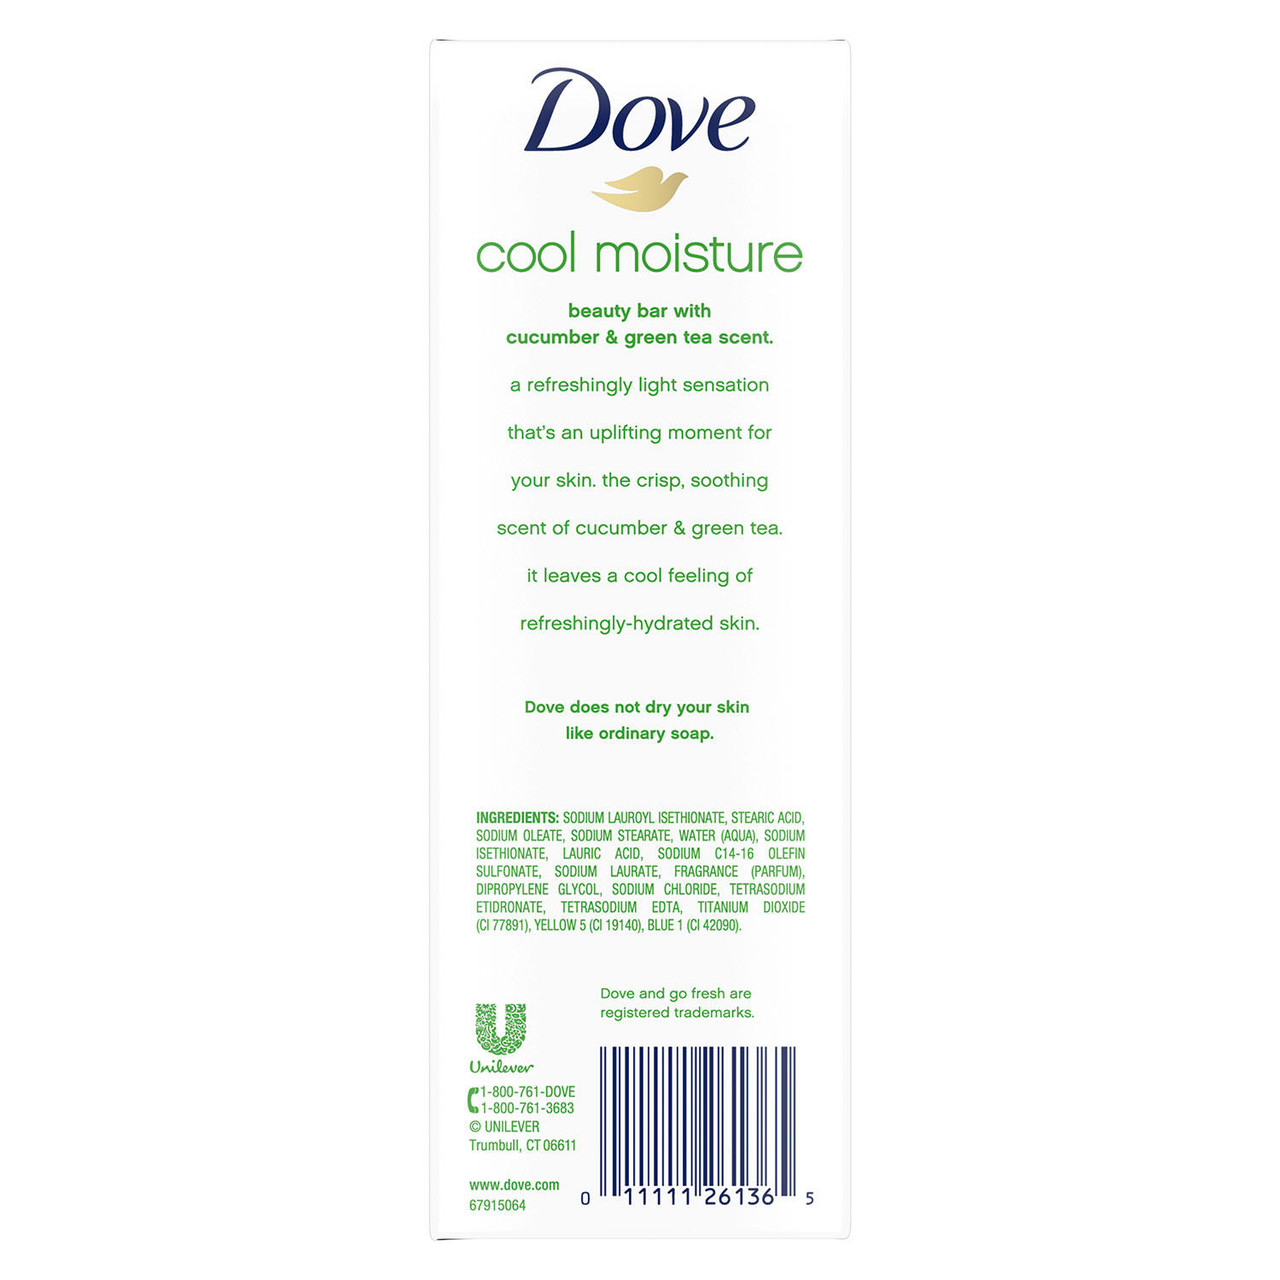 Dove Go Fresh Beauty Bar, Cool Moisture (3.75 oz., 16 ct.) - [From 72.00 - Choose pk Qty ] - *Ships from Miami